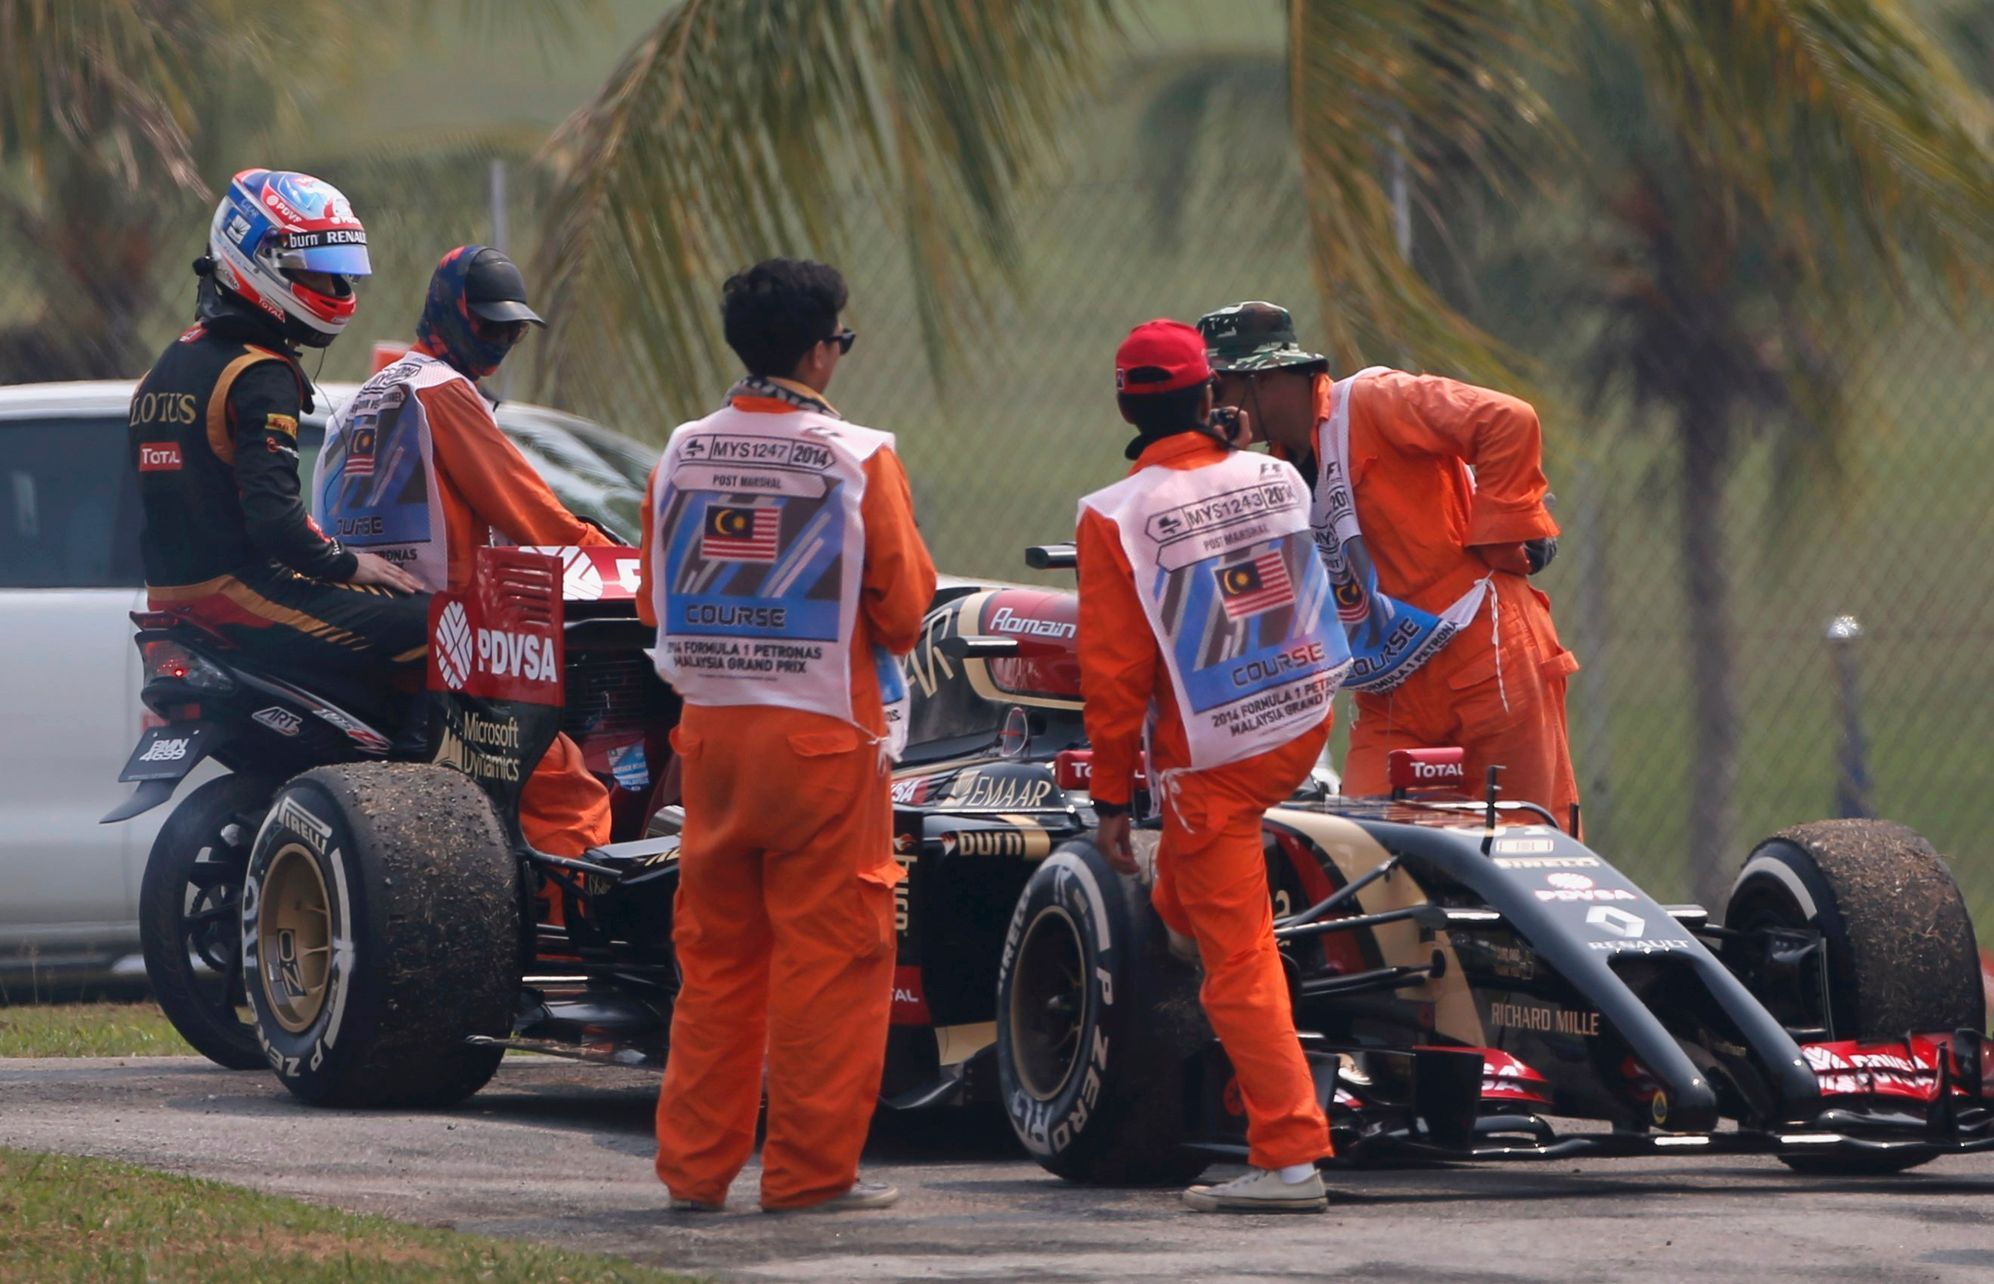 Lotus Formula One driver Grosjean of France is driven back to pits after leaving his car during the second practice session of the Malaysian F1 Grand Prix at Sepang International Circuit outside Kuala